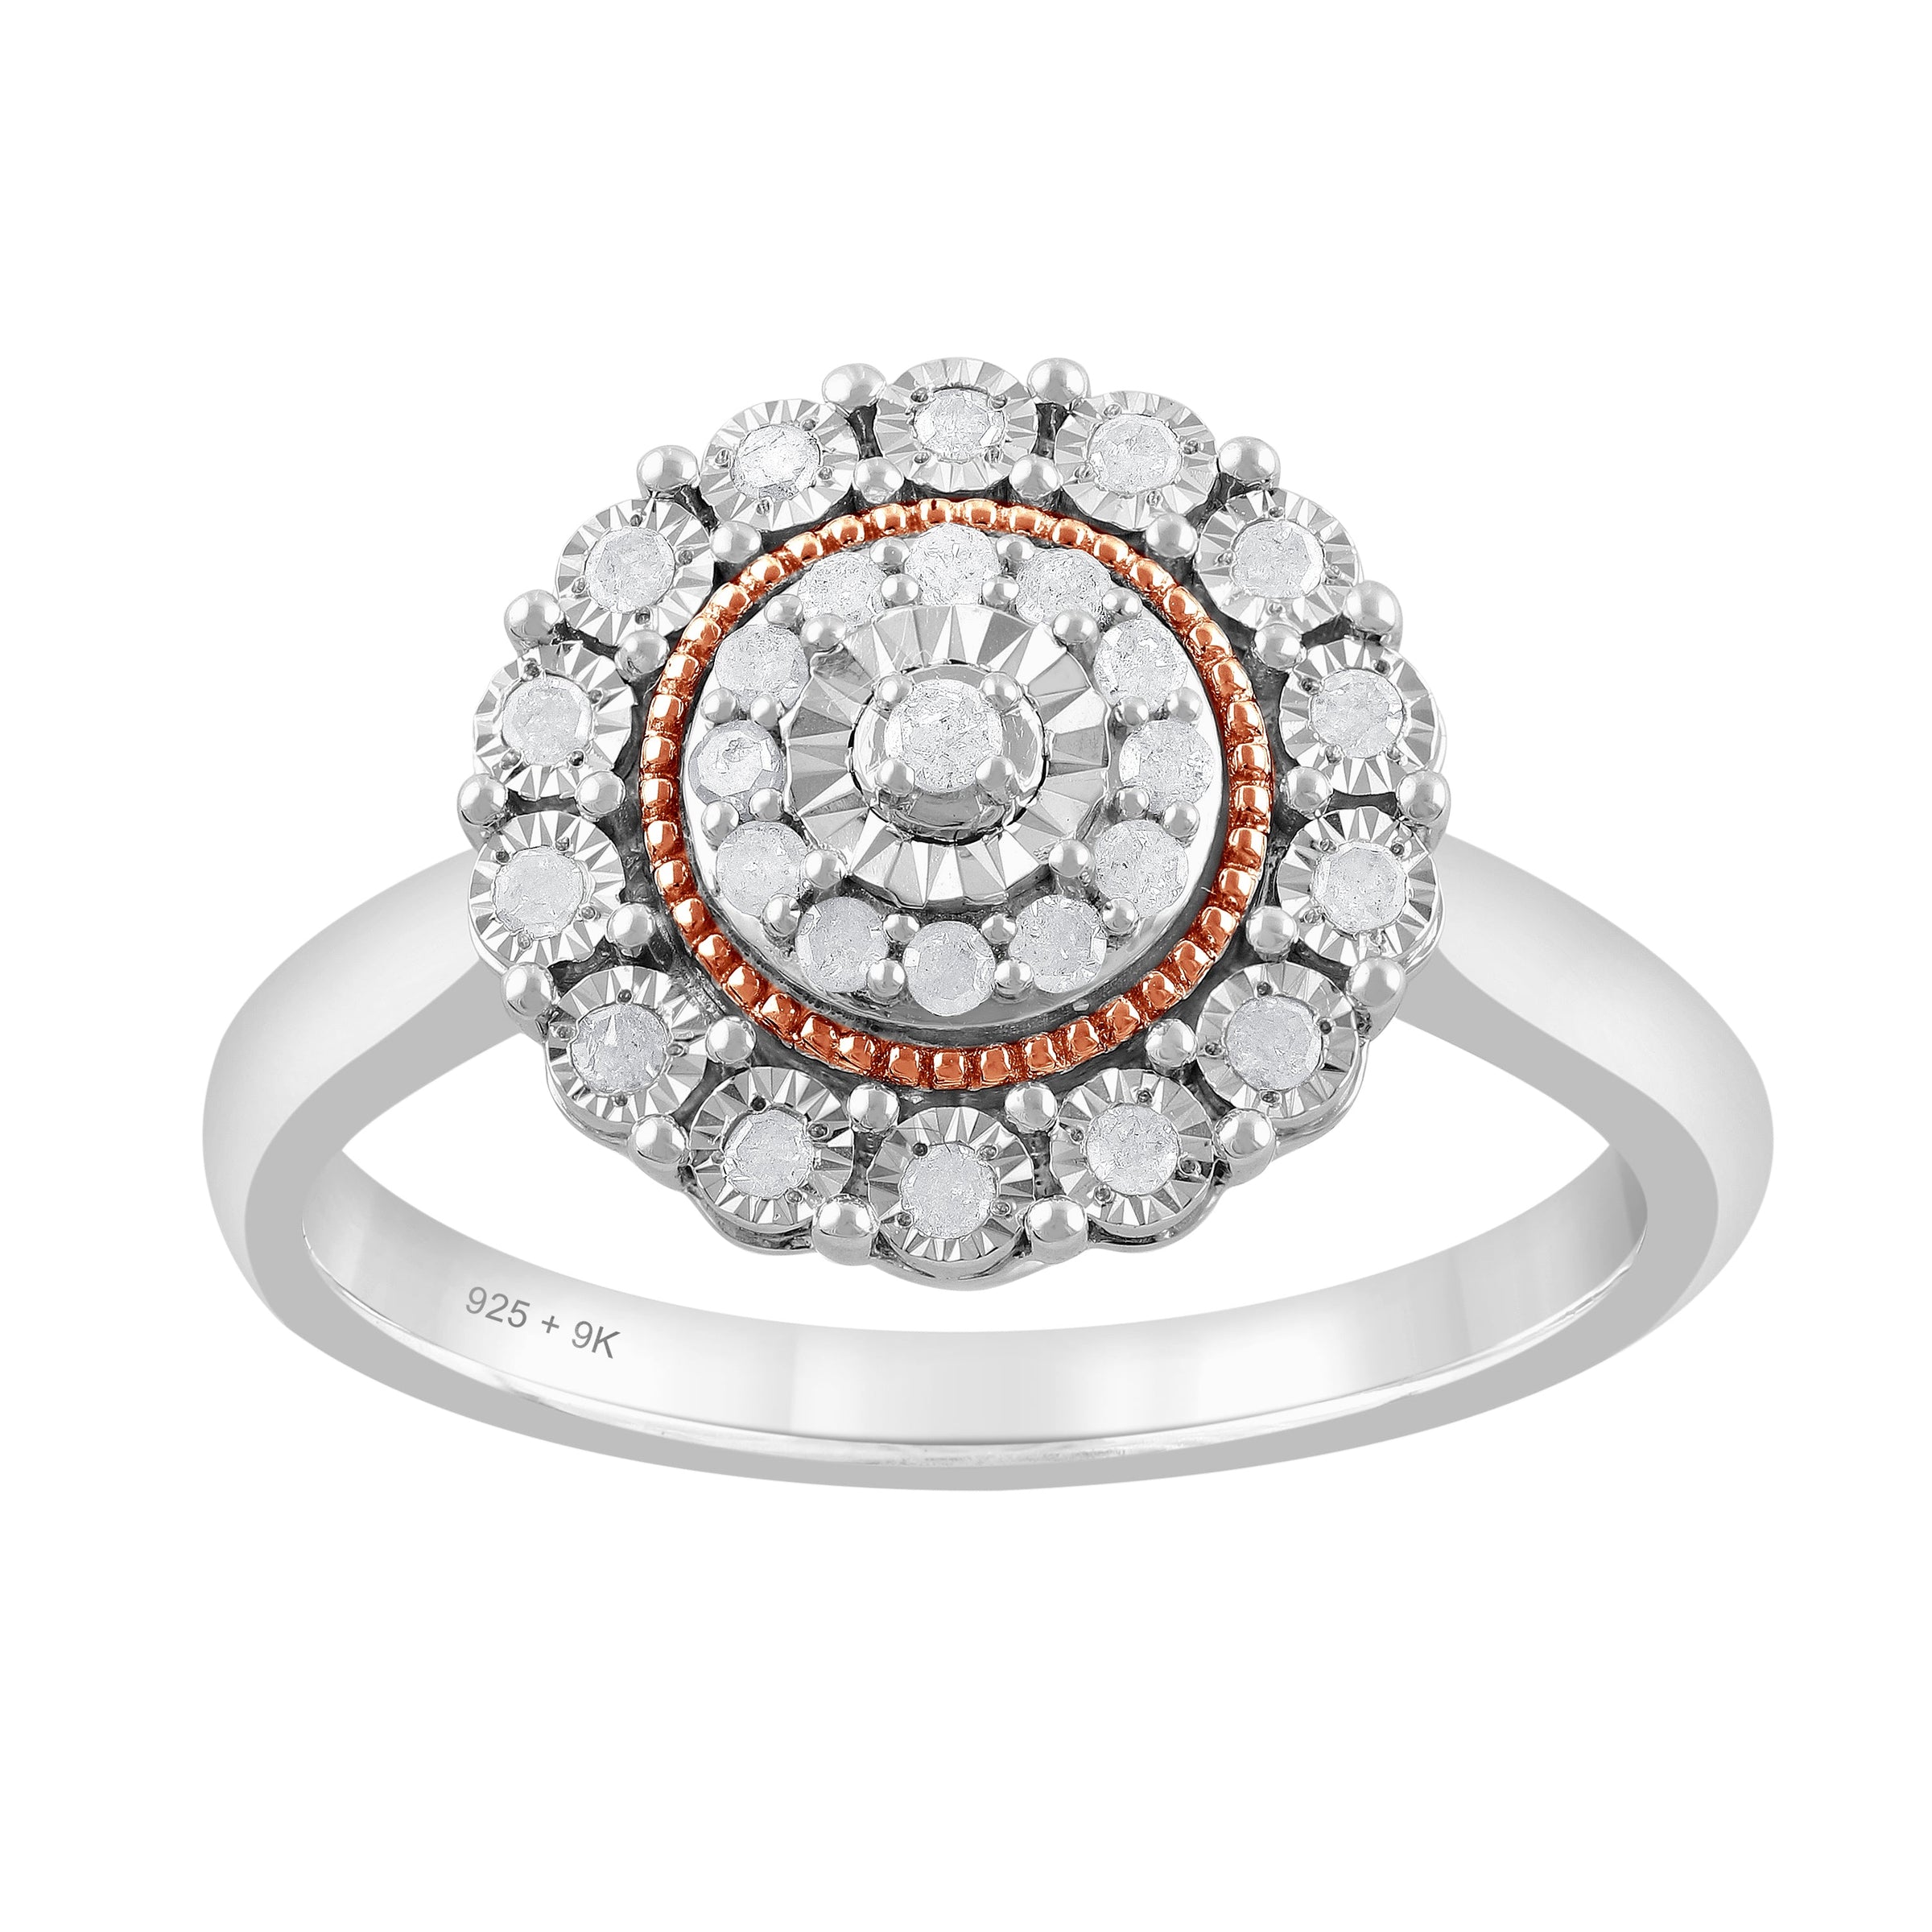 Miracle Halo Ring with 1/5ct of Diamonds in Sterling Silver & 9ct Rose Gold Rings Bevilles 